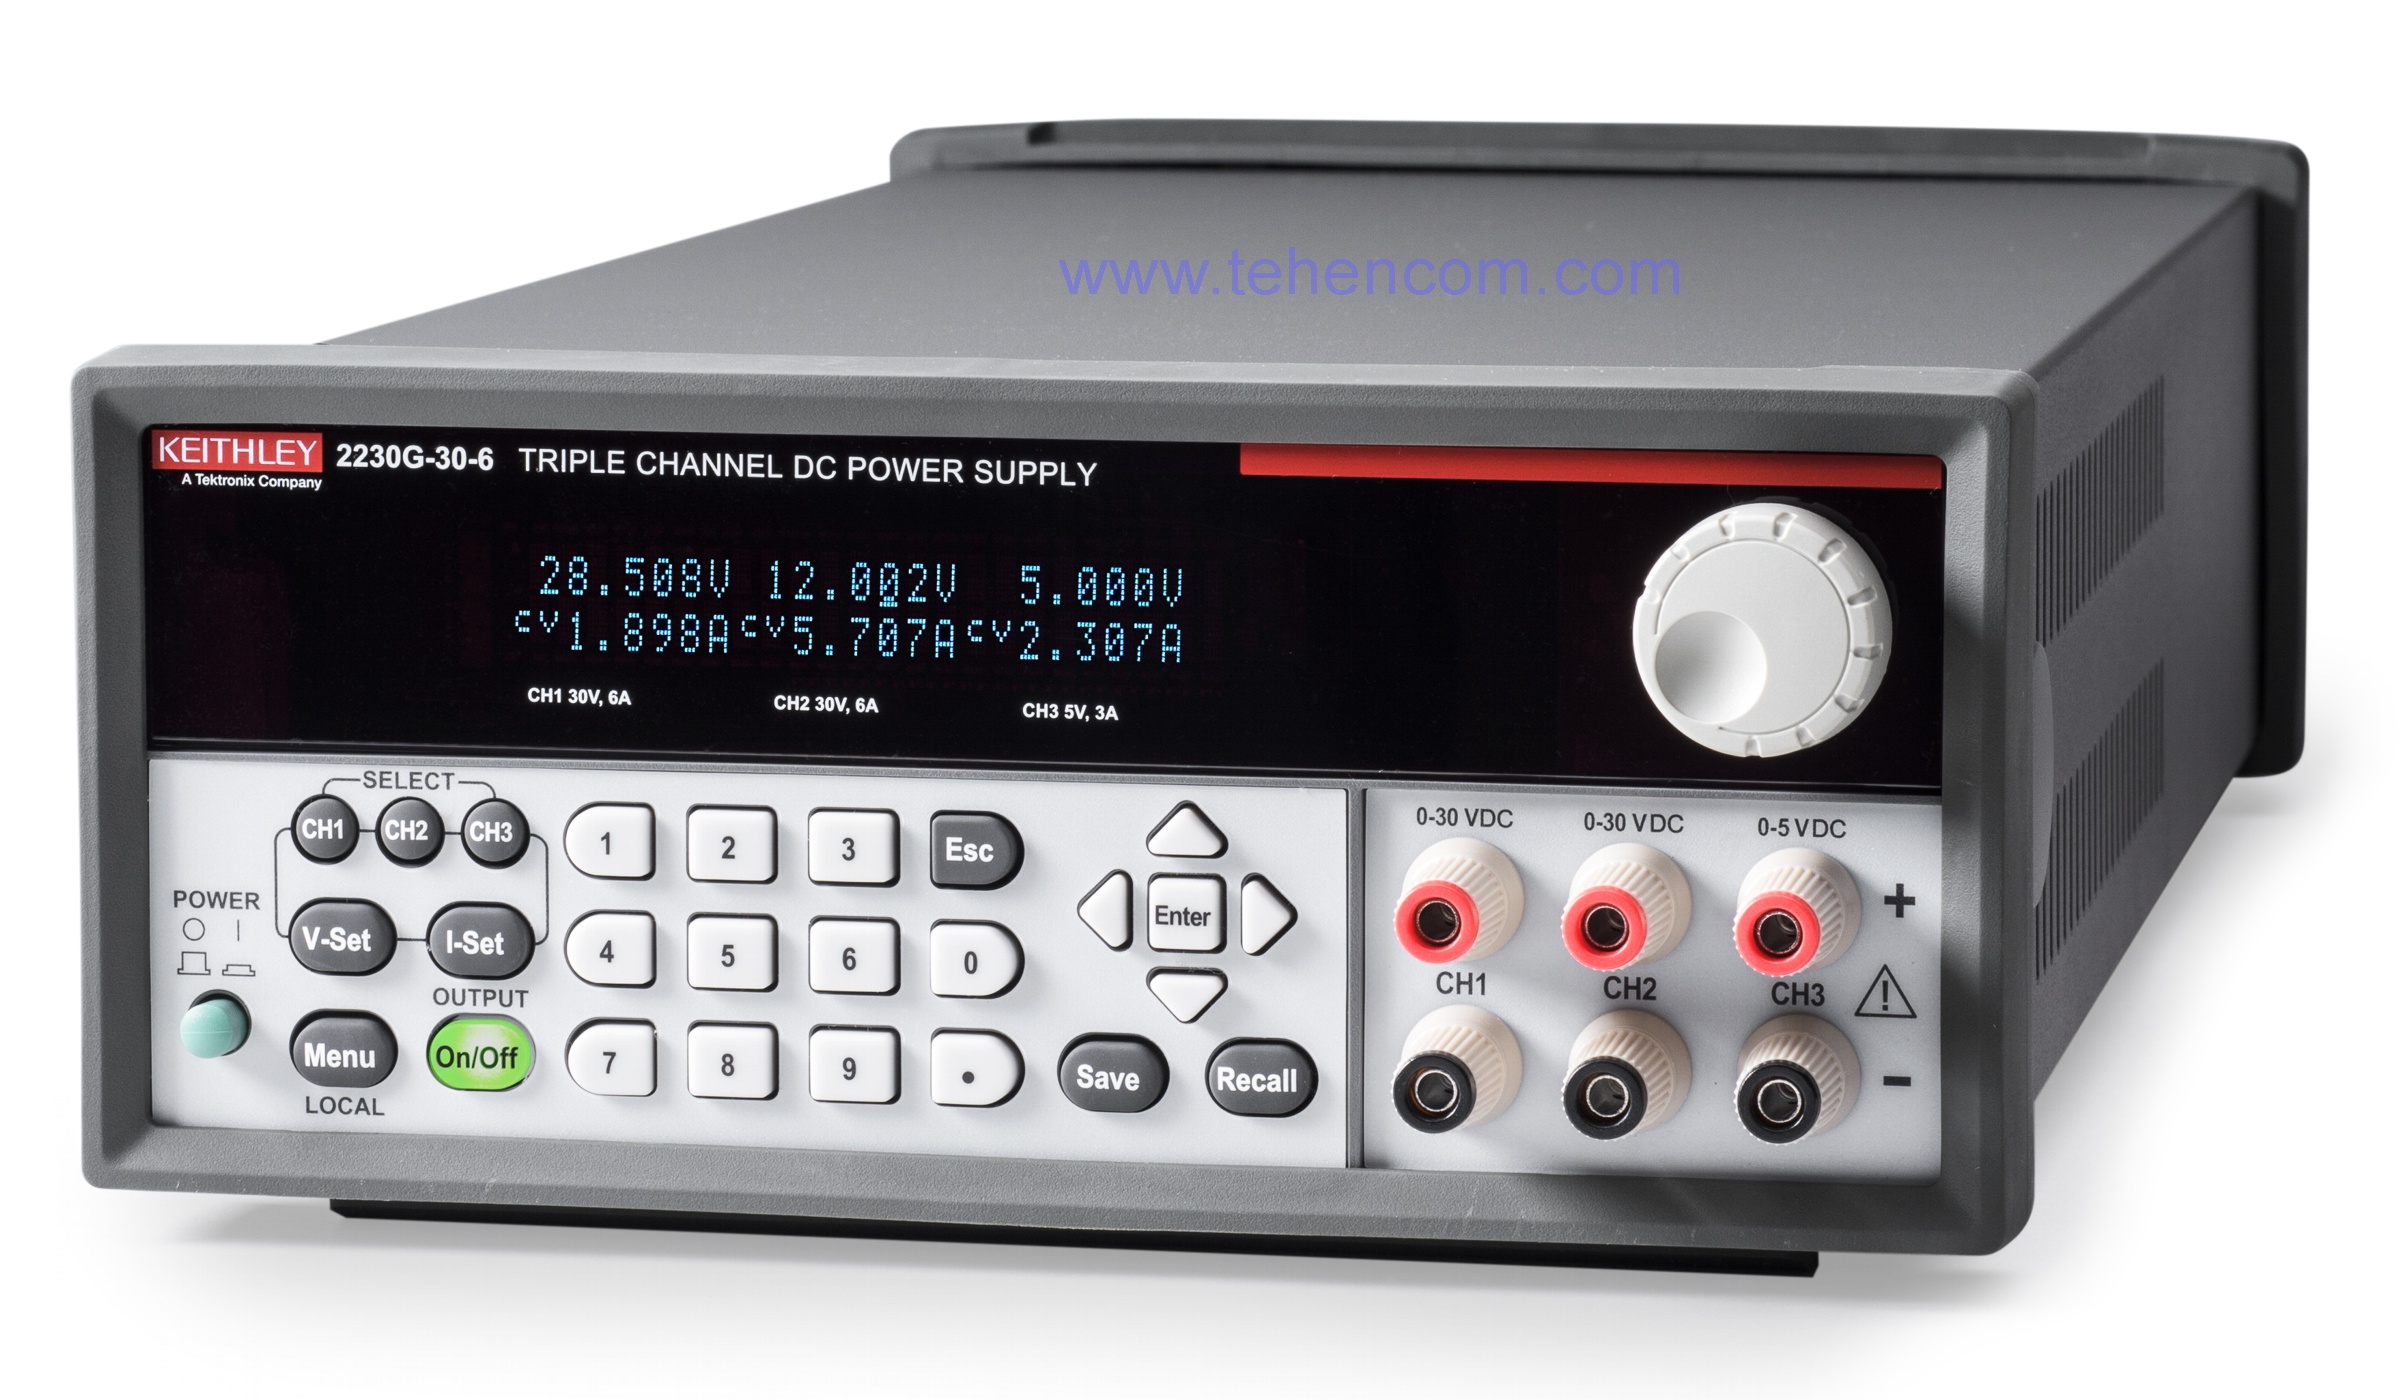 Keithley 2230-30-6